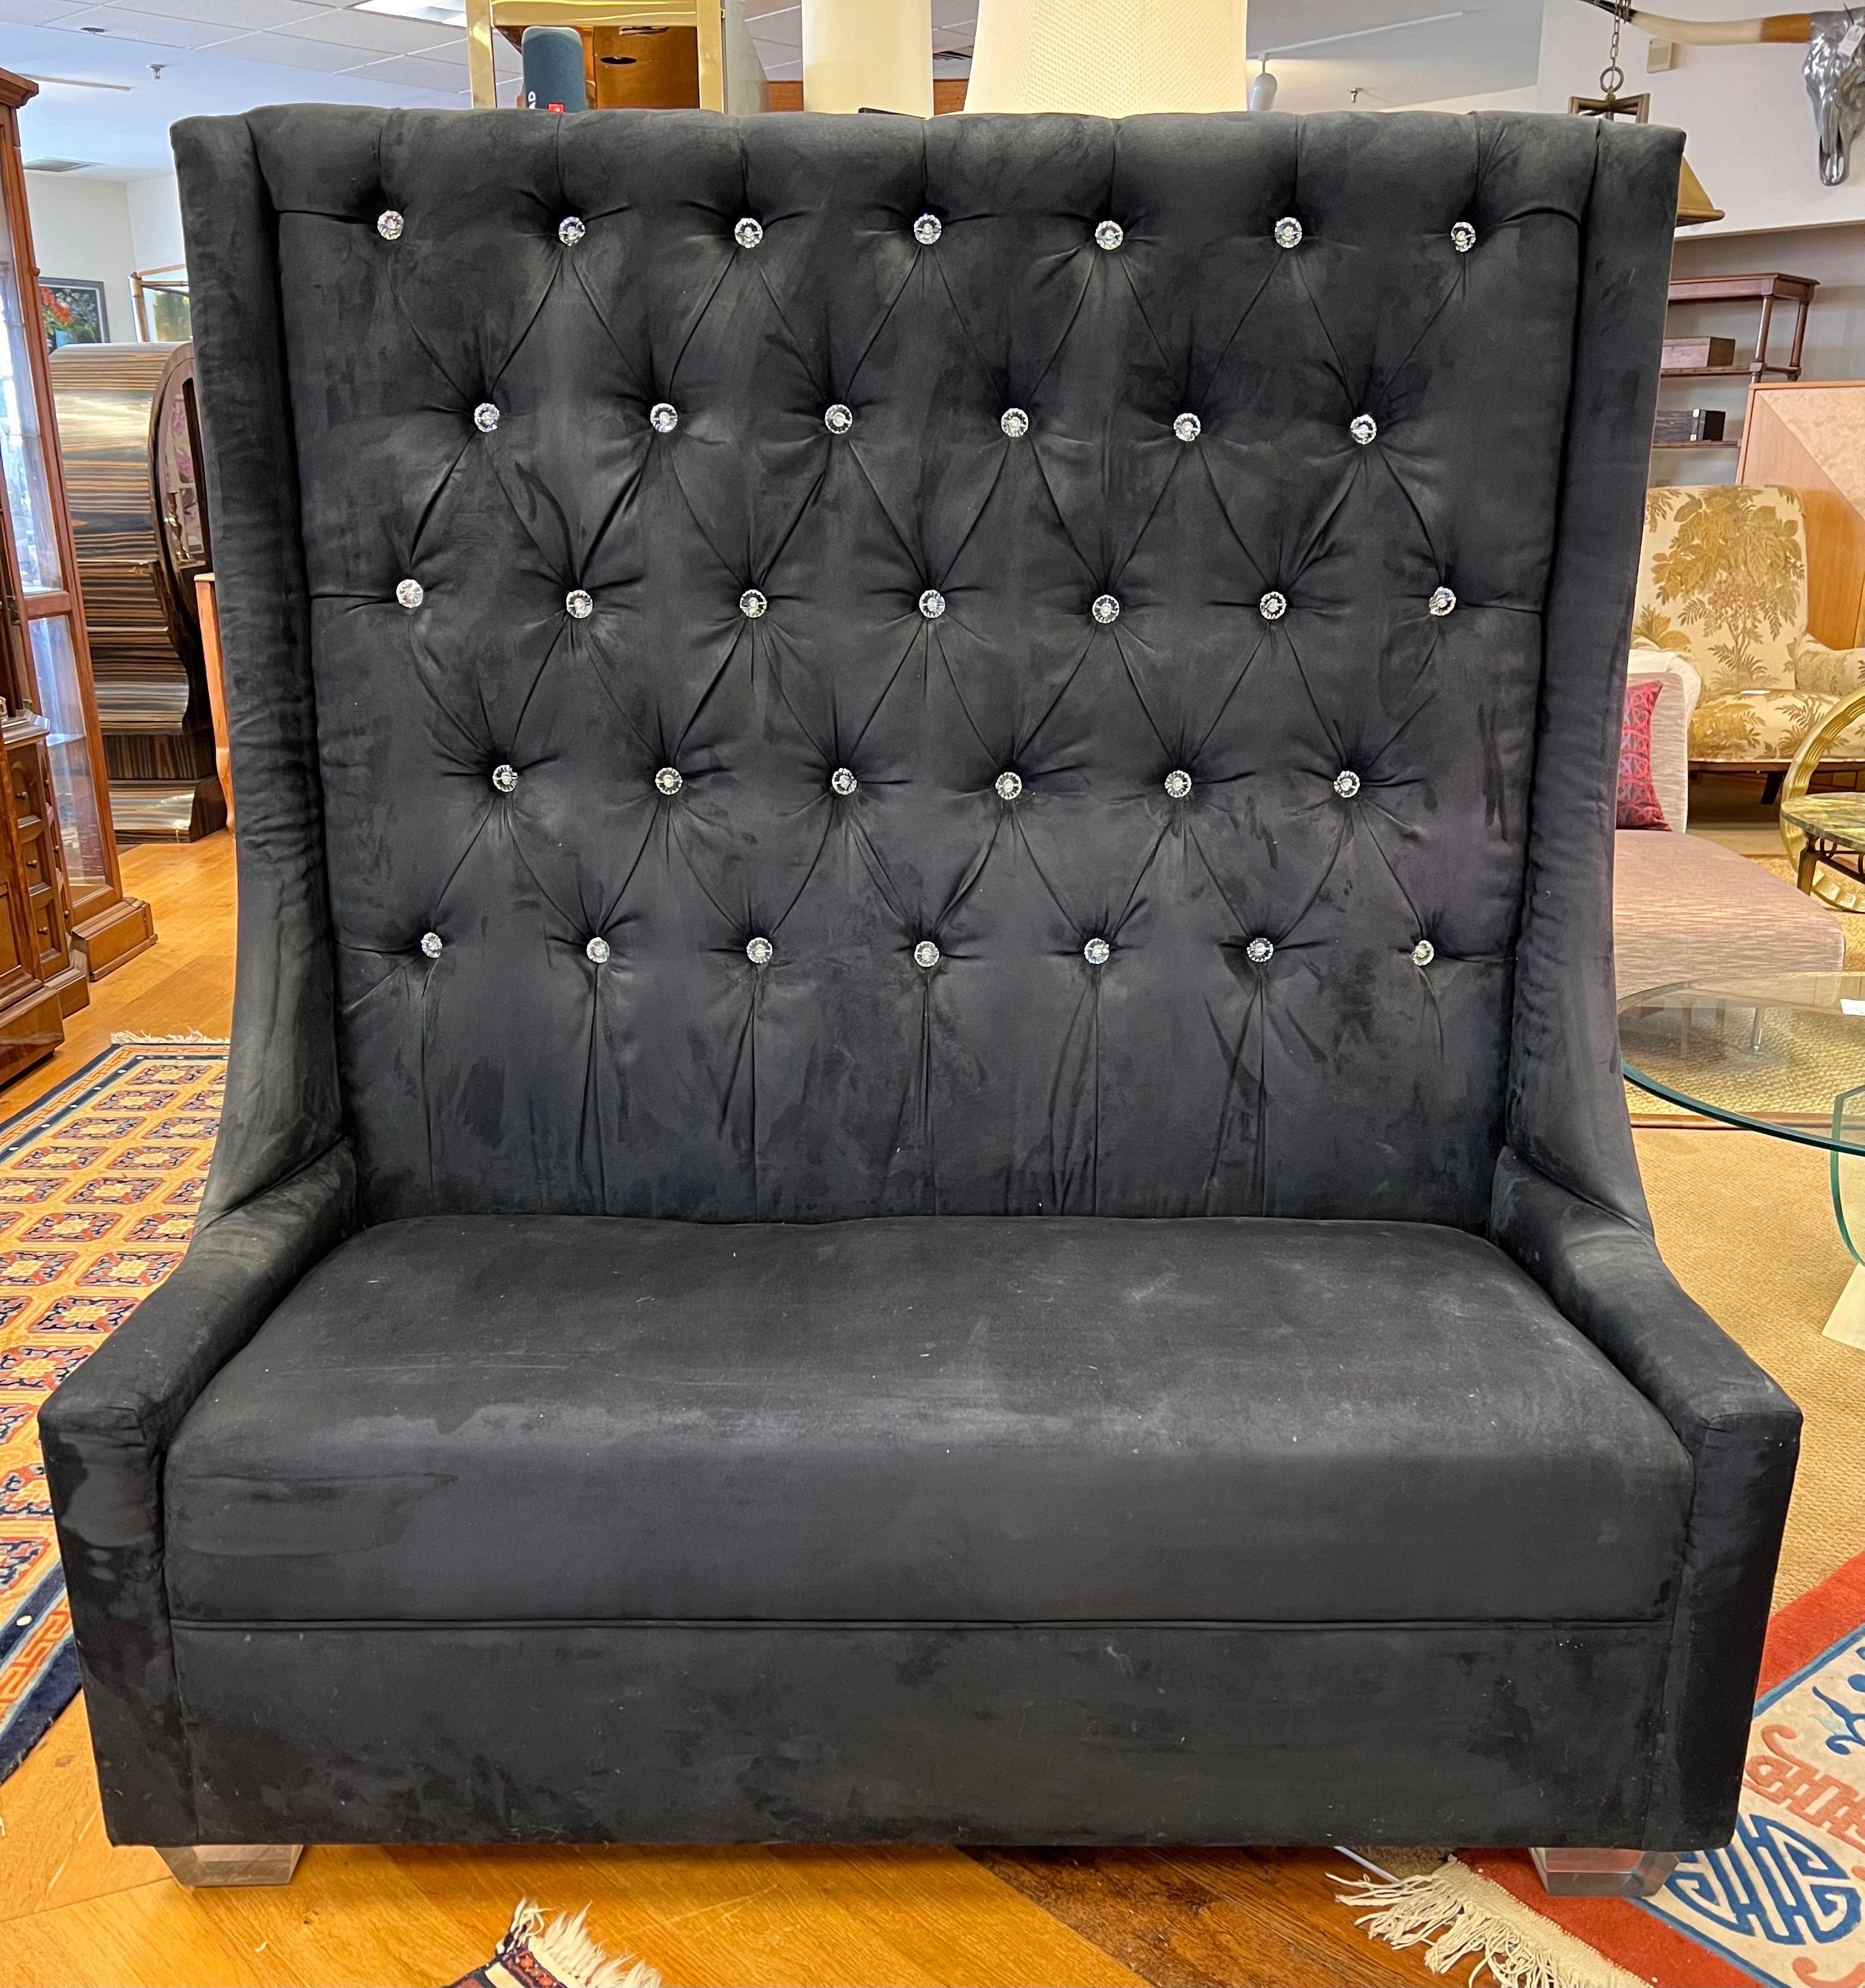 Stunning, signed Shlomi Haziza one of a kind suede leather banquette sofa loveseat with crystal tufted buttons and supported by heavy lucite legs, one of which has the designer's signature - front left facing - see pics. The rich and luxurious suede